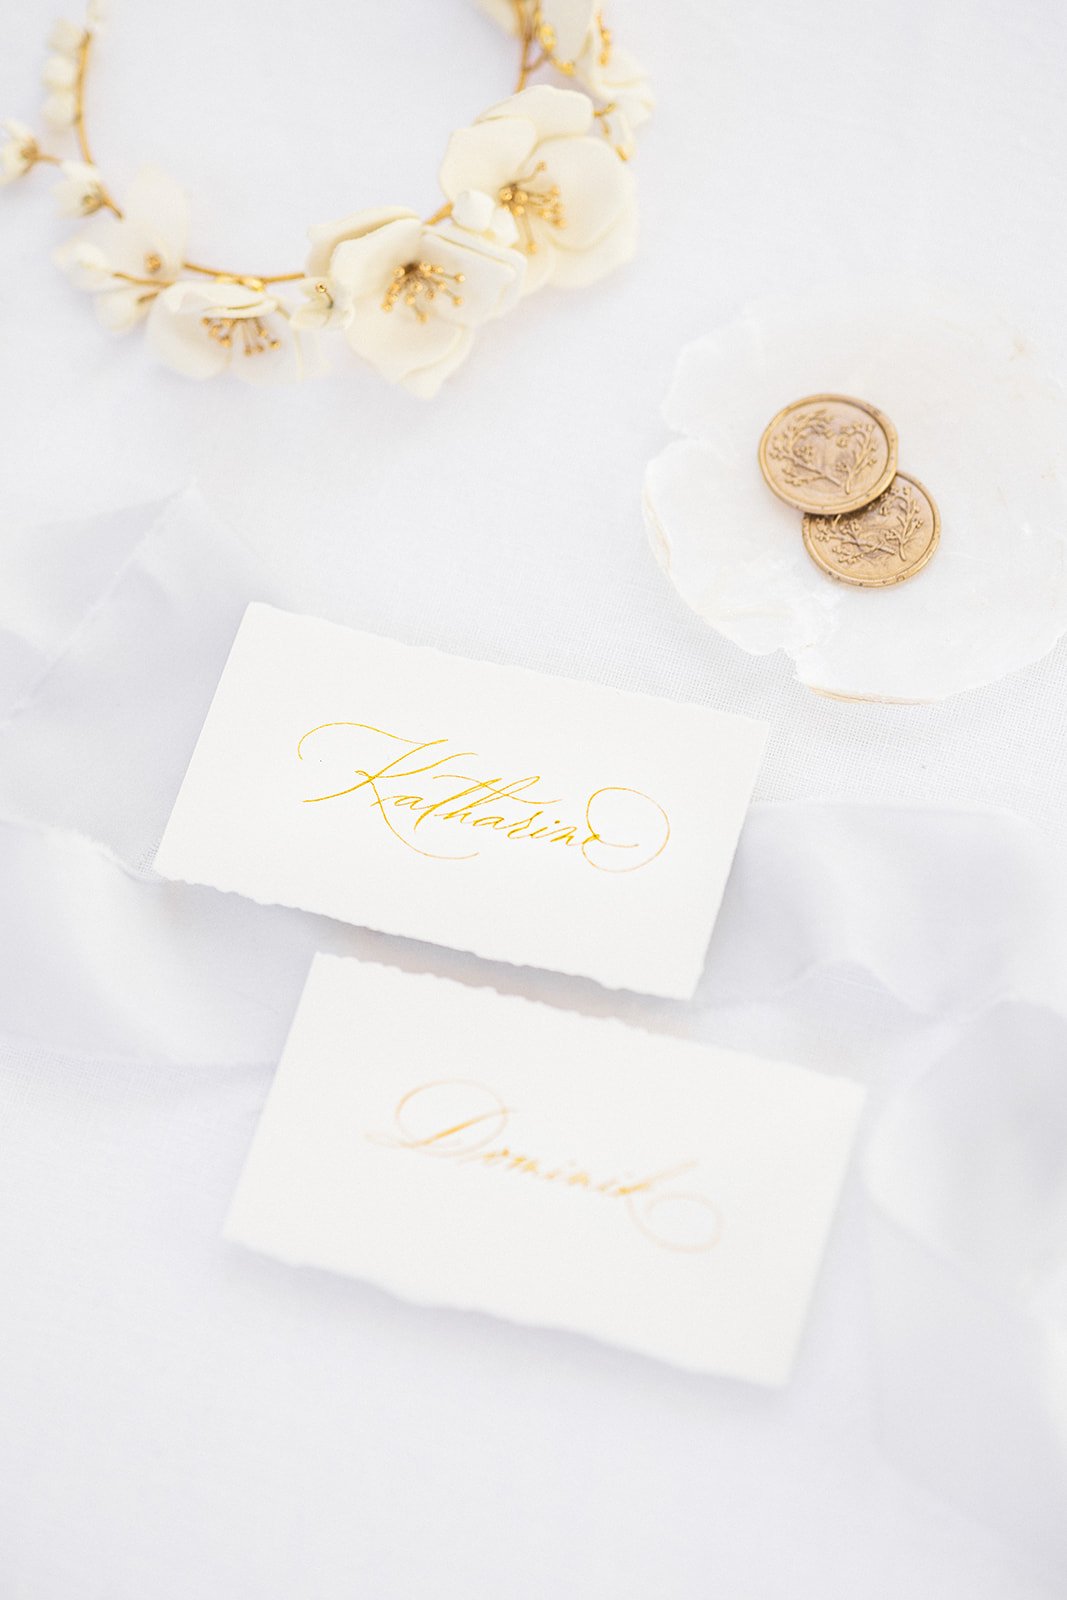 white-and-gold-calligraphy-place-cards.jpg